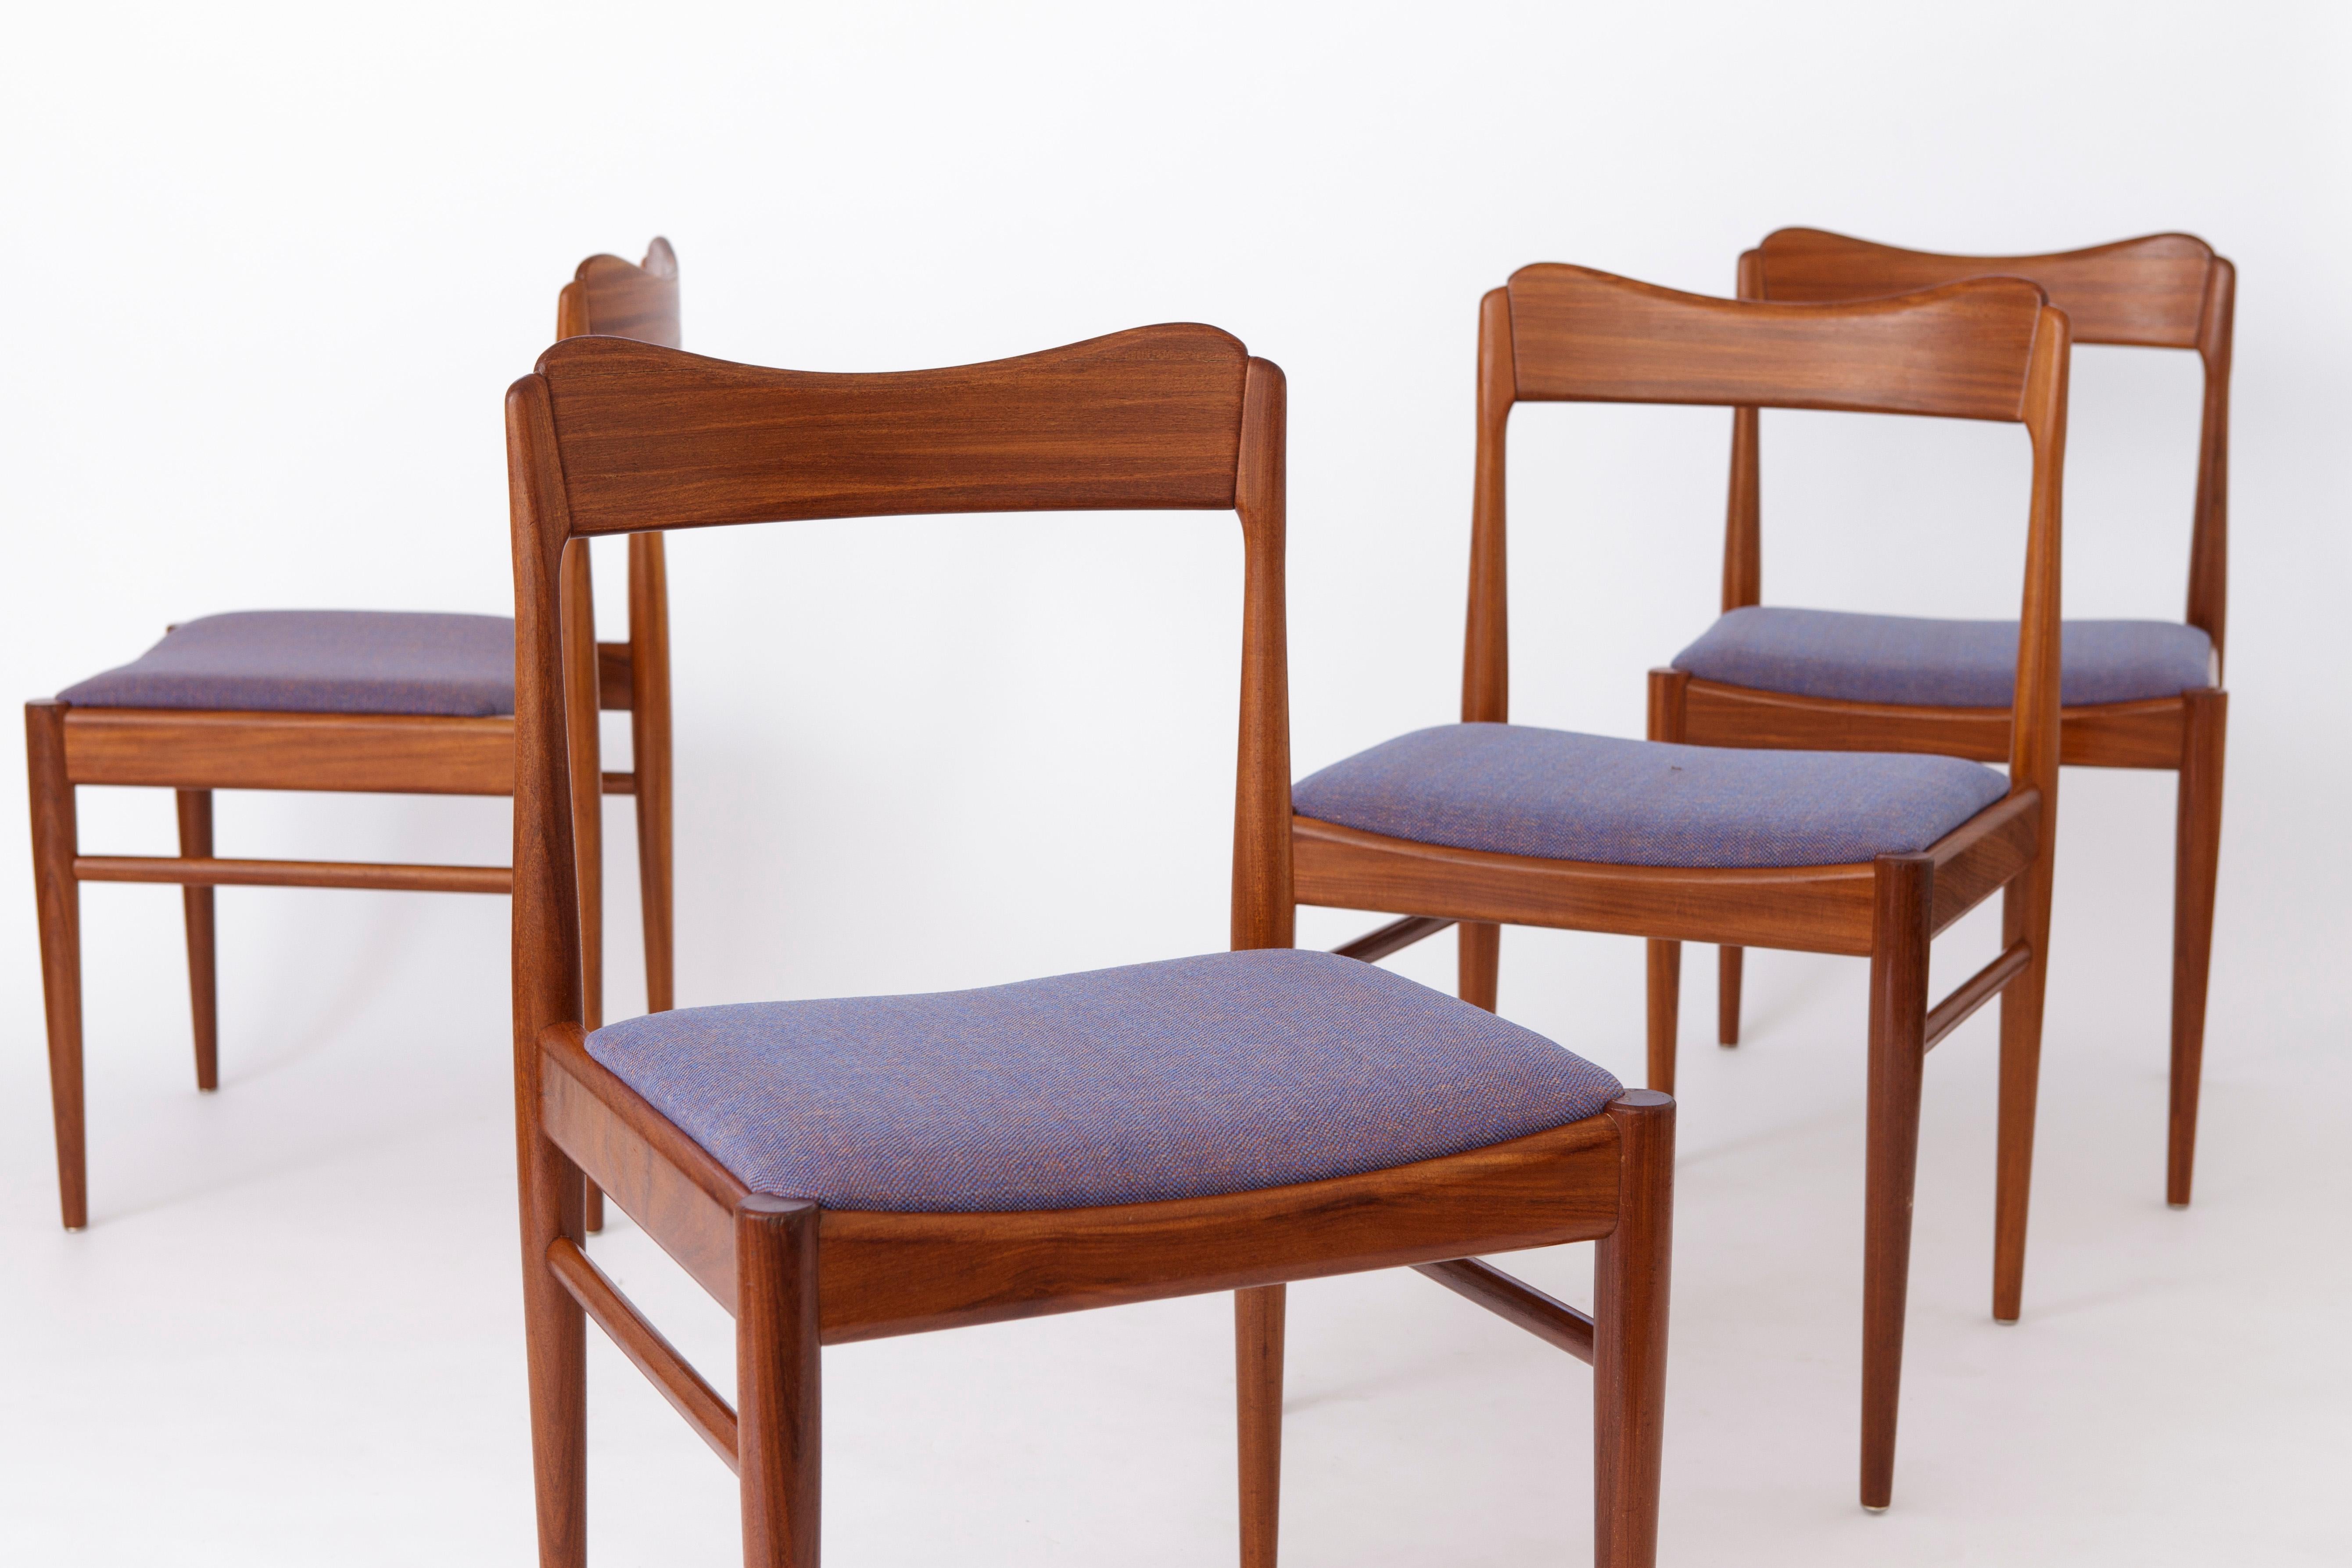 Set of 4 dining chairs. Danish origin. 
Unknown manufacturer. 
Displayed price is for a set of 4. 

Sturdy teak chairs frames. Refurbished and oiled. 
Reupholstered with blue textile cover. 